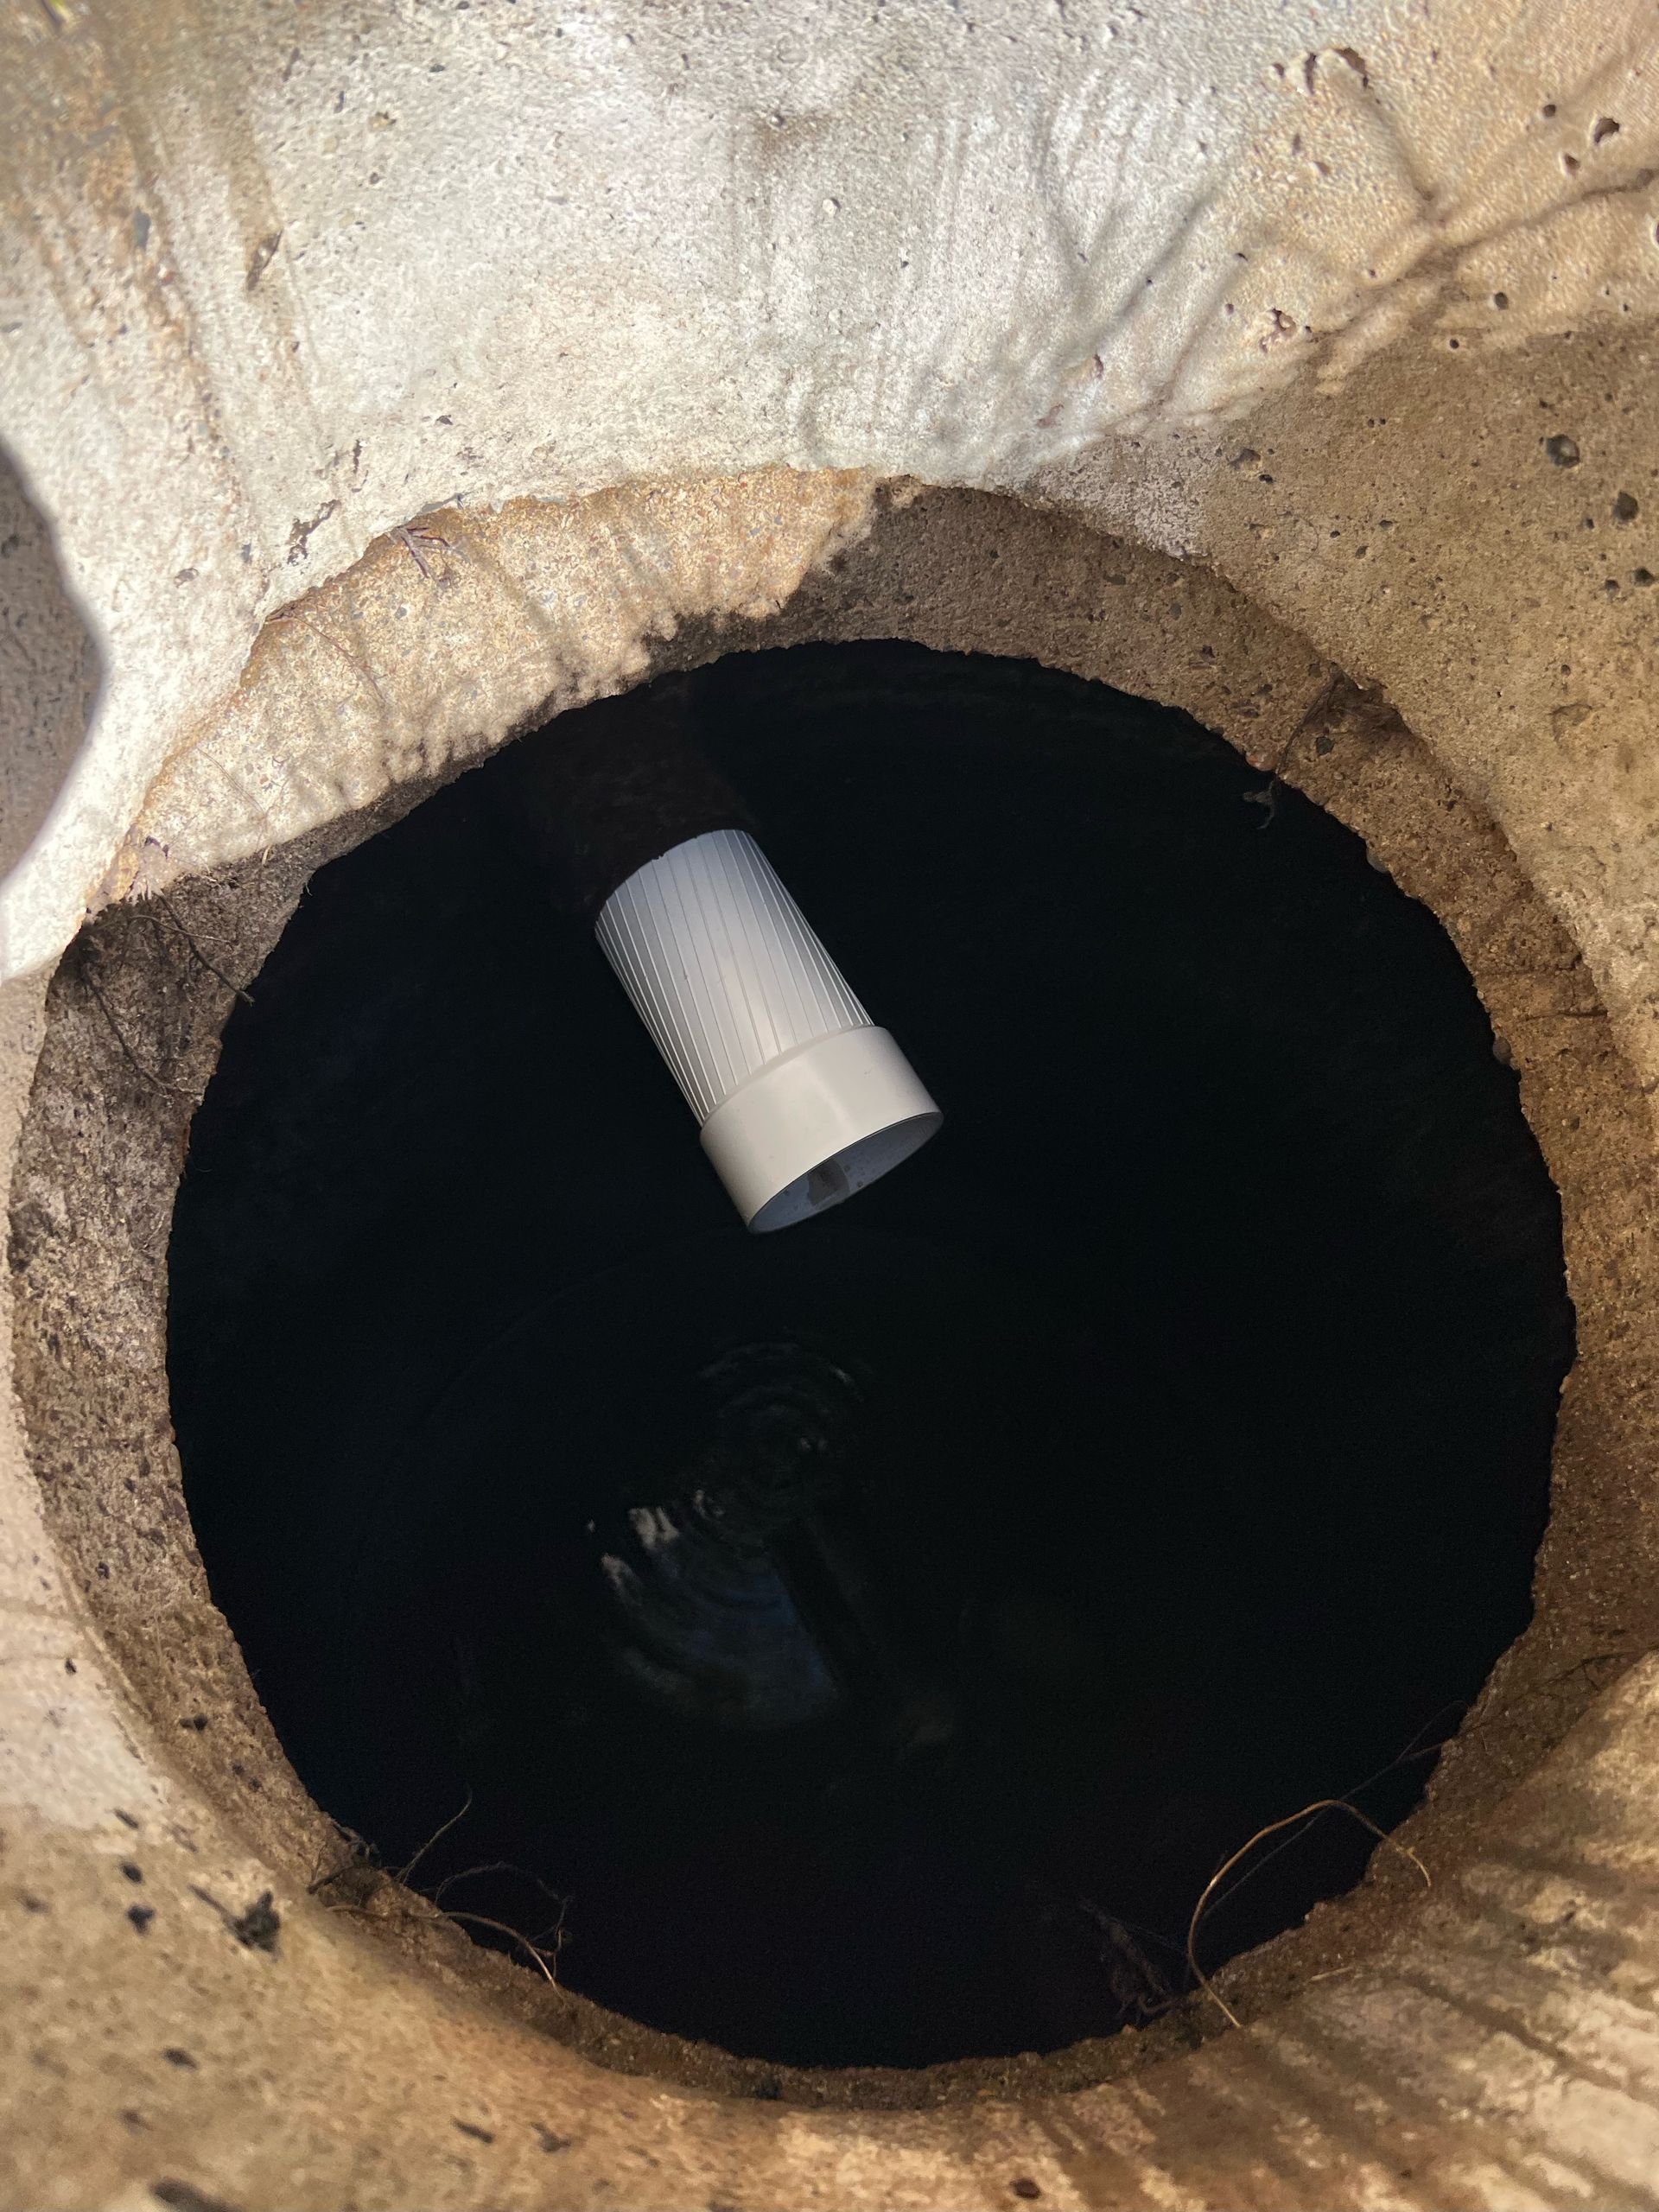 Sewage pumping machine is unclogging blocked manhole — Delta, CO — On a Budget Rooter